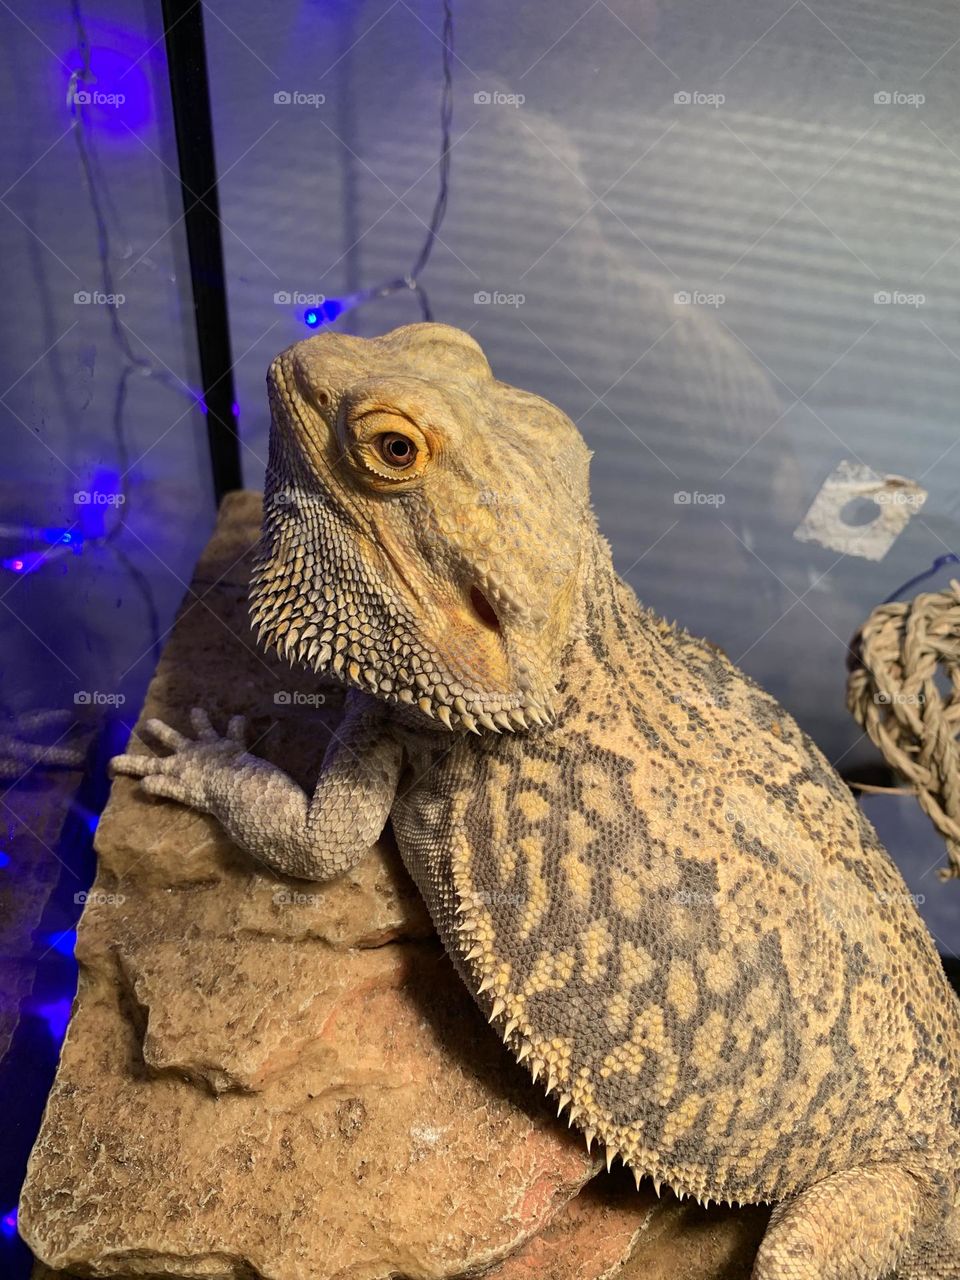 Bearded dragon looking angry 